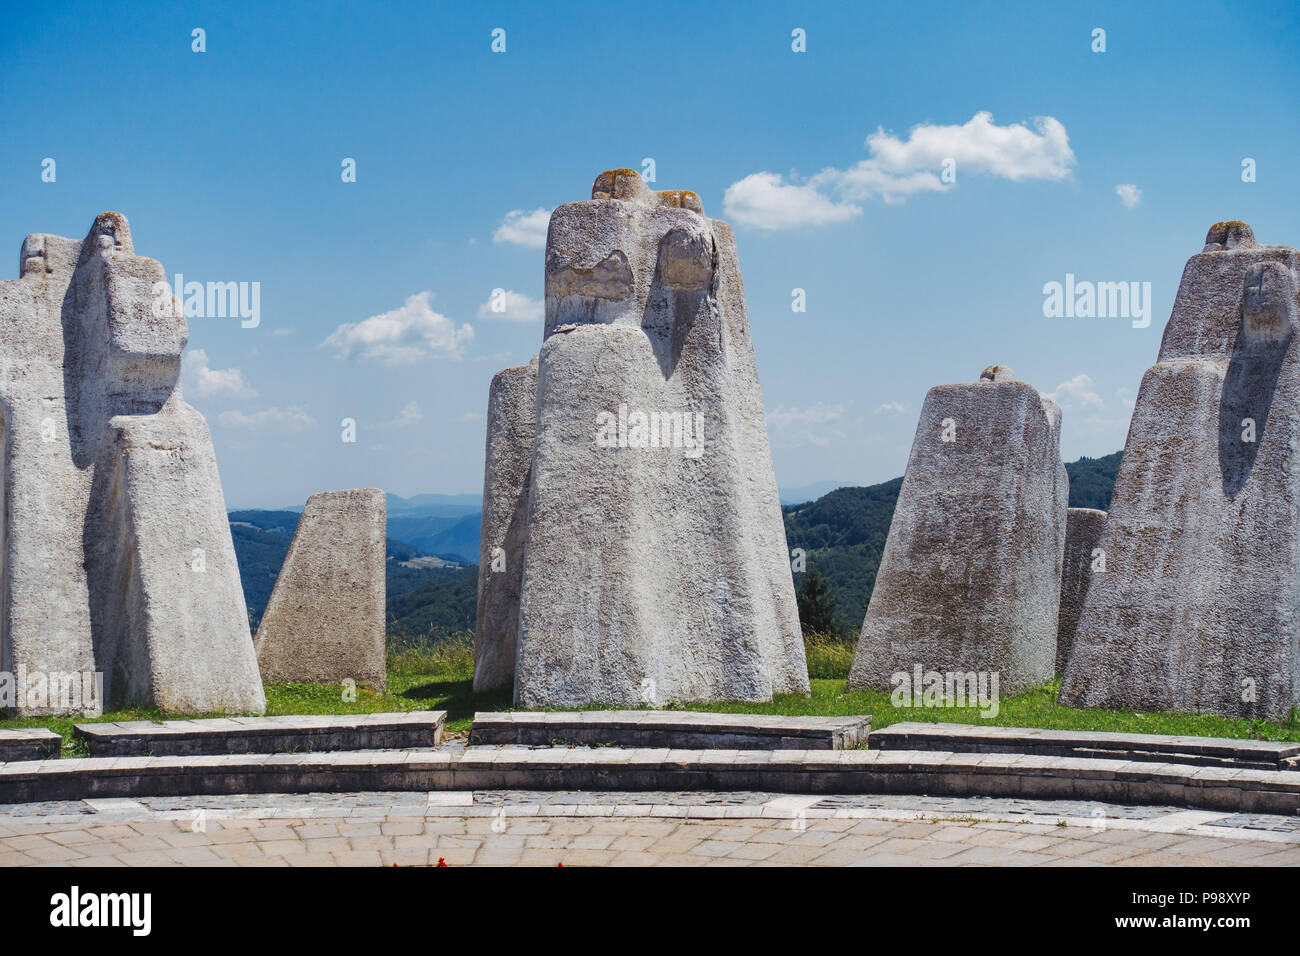 the sweeping white concrete slabs commemorating fallen Partisan fighters at the Kadinjača Memorial Complex, Serbia Stock Photo